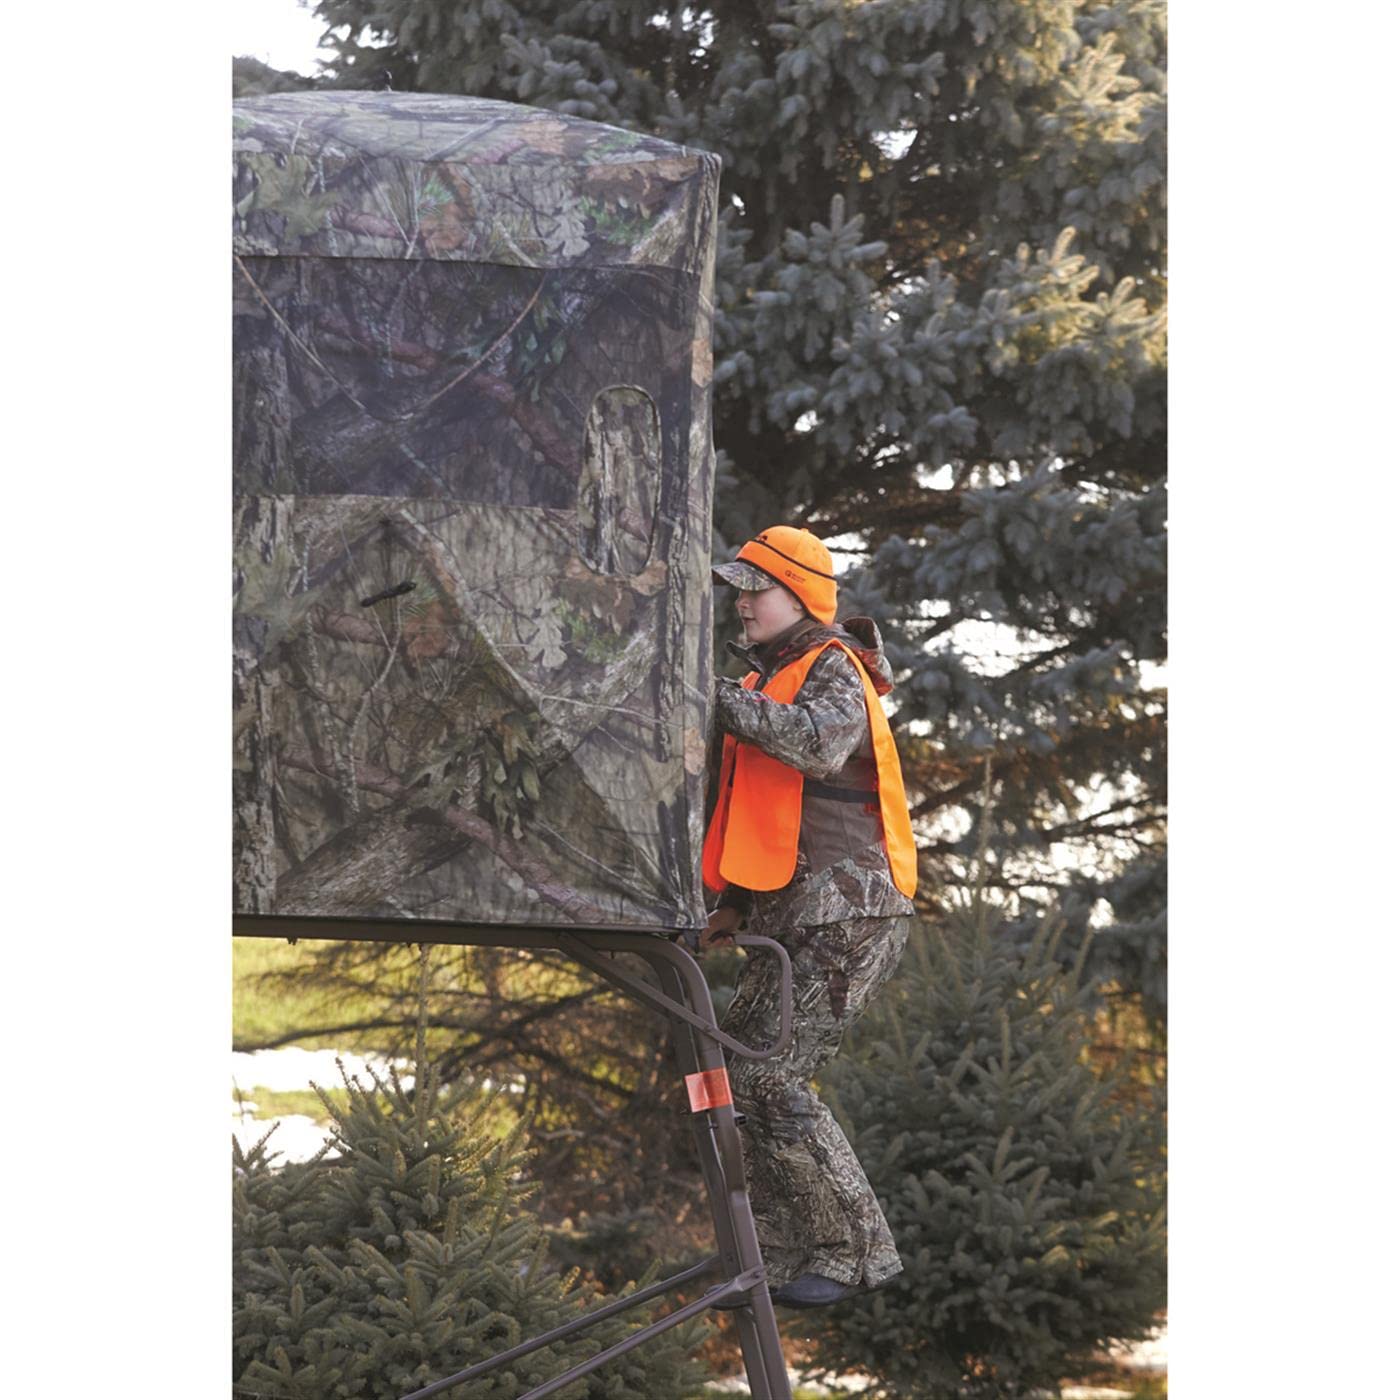 Guide Gear 6' Tripod Hunting Tower Blind, 2-Man Stand Elevated, Hunting Gear Equipment Accessories, 4x4